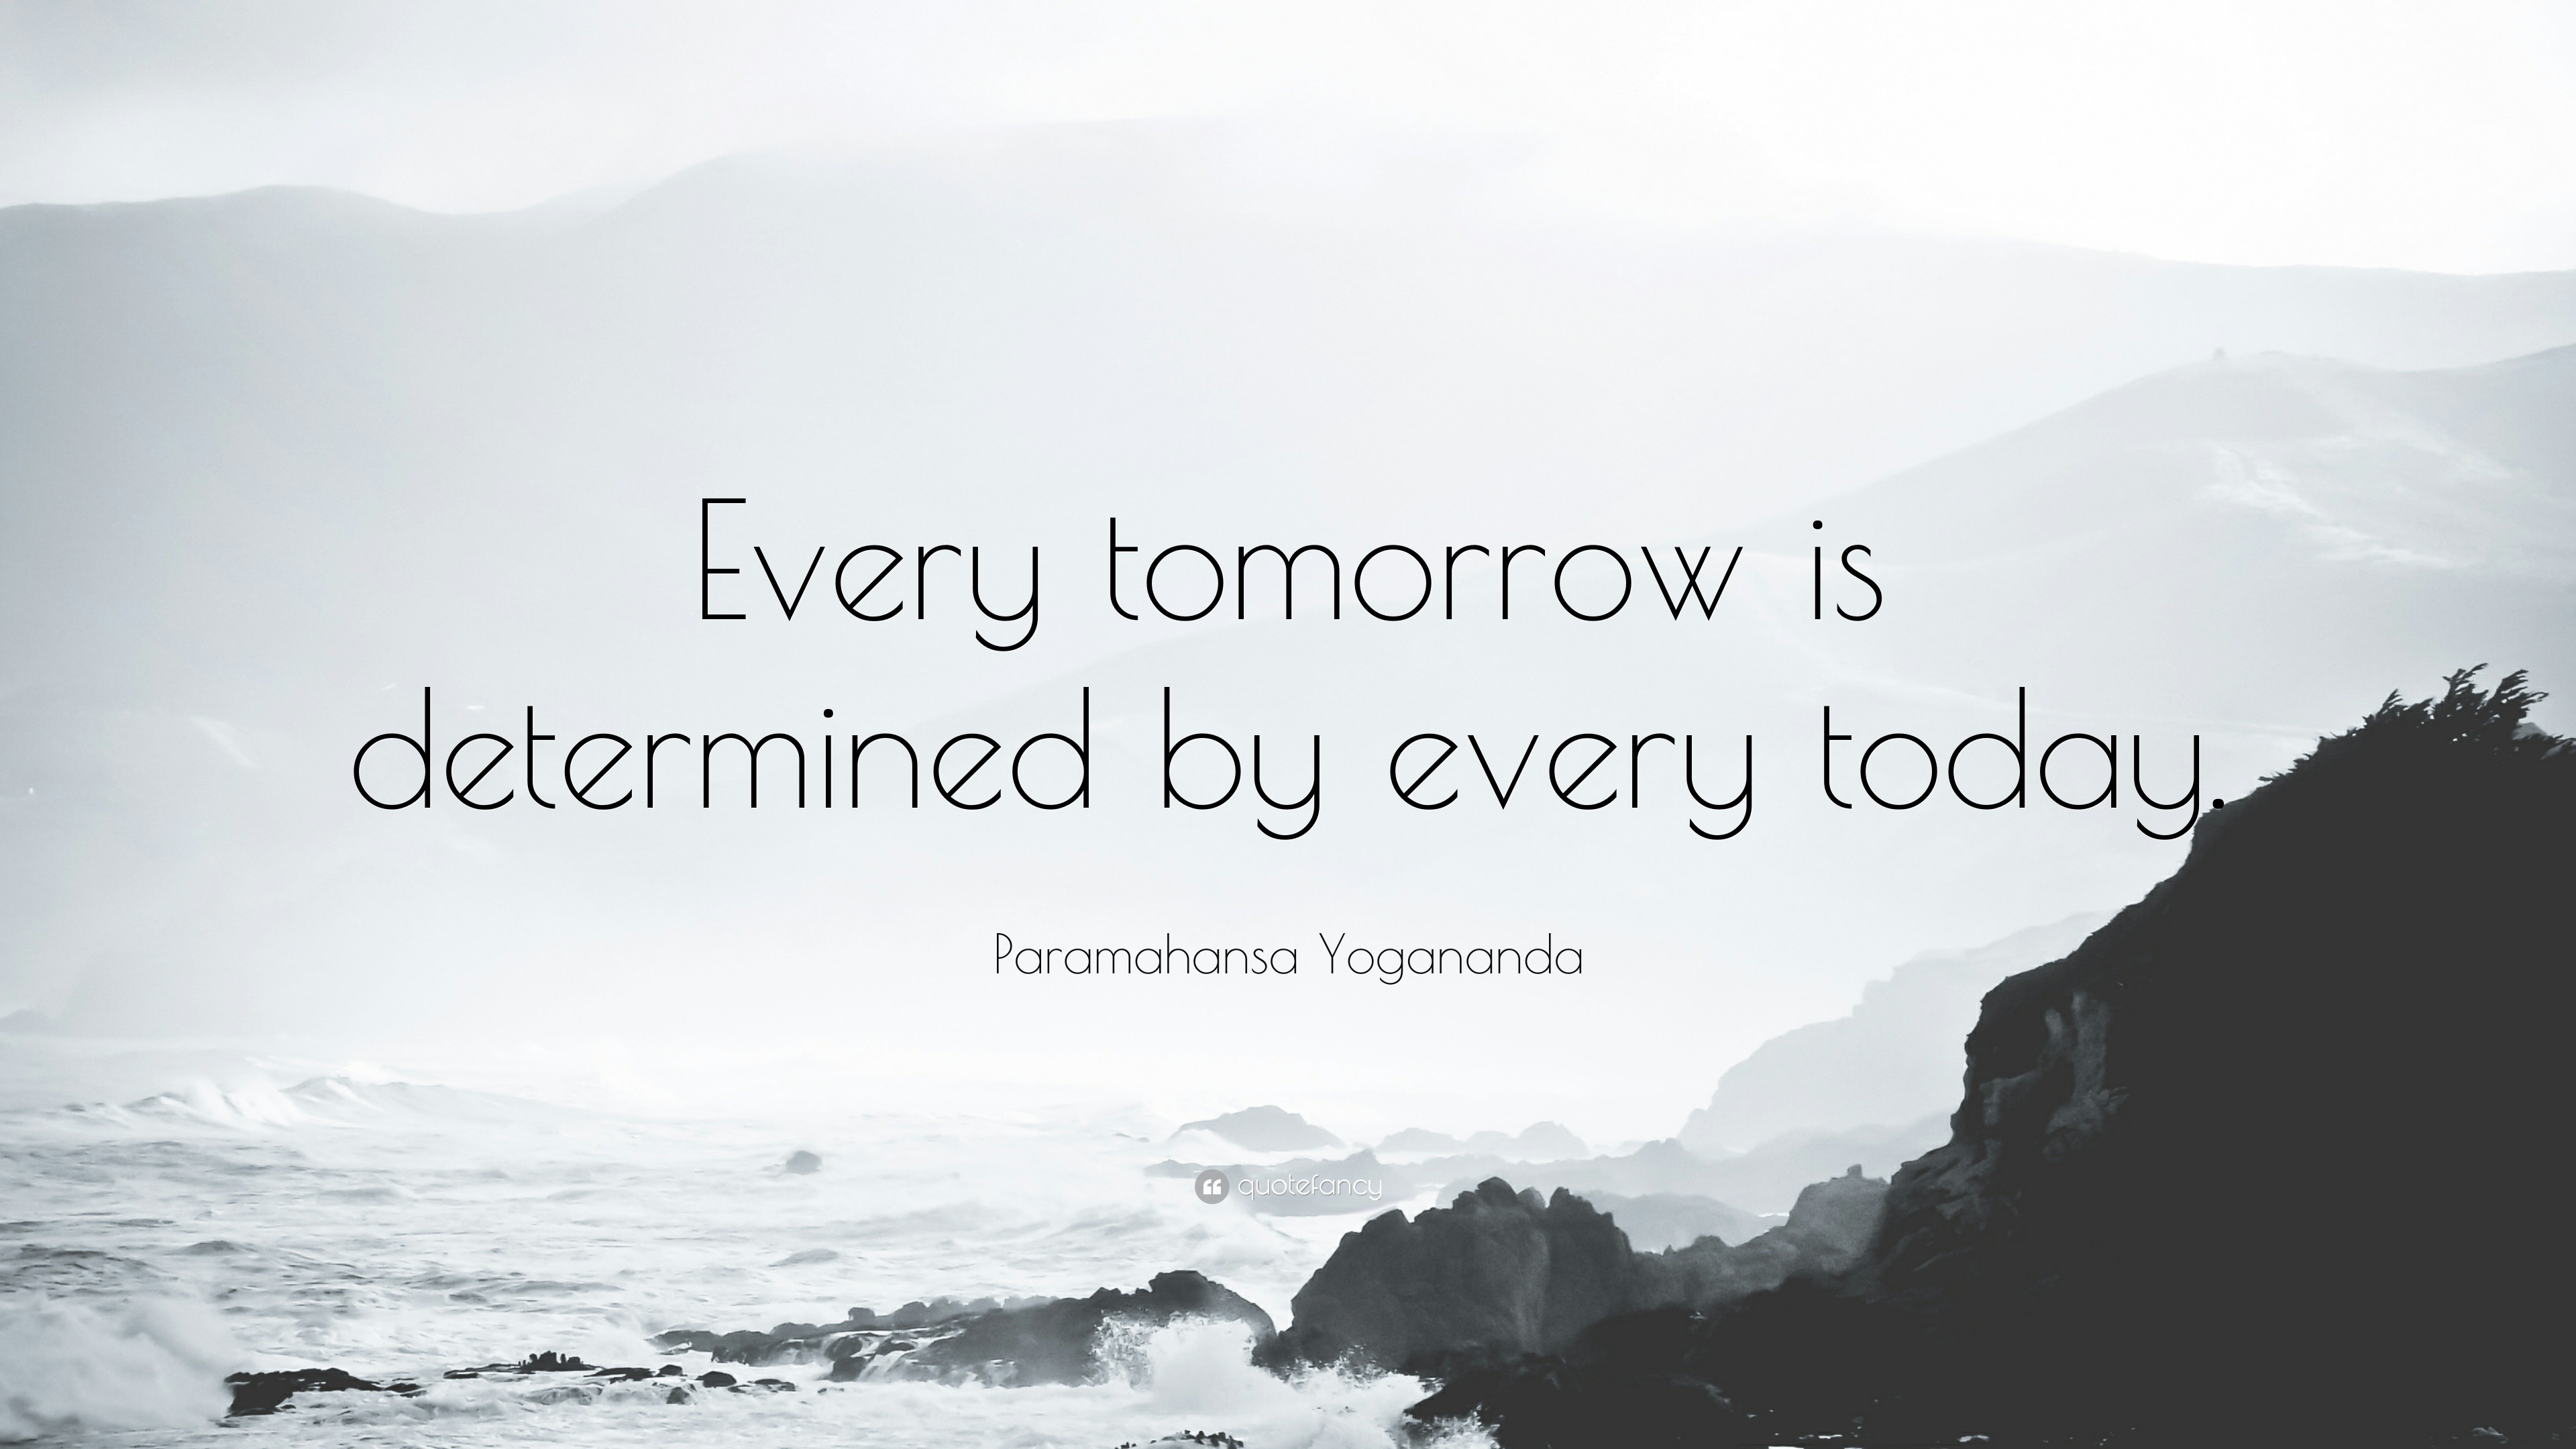 Paramahansa Yogananda Quote: “Every tomorrow is determined by every today.”